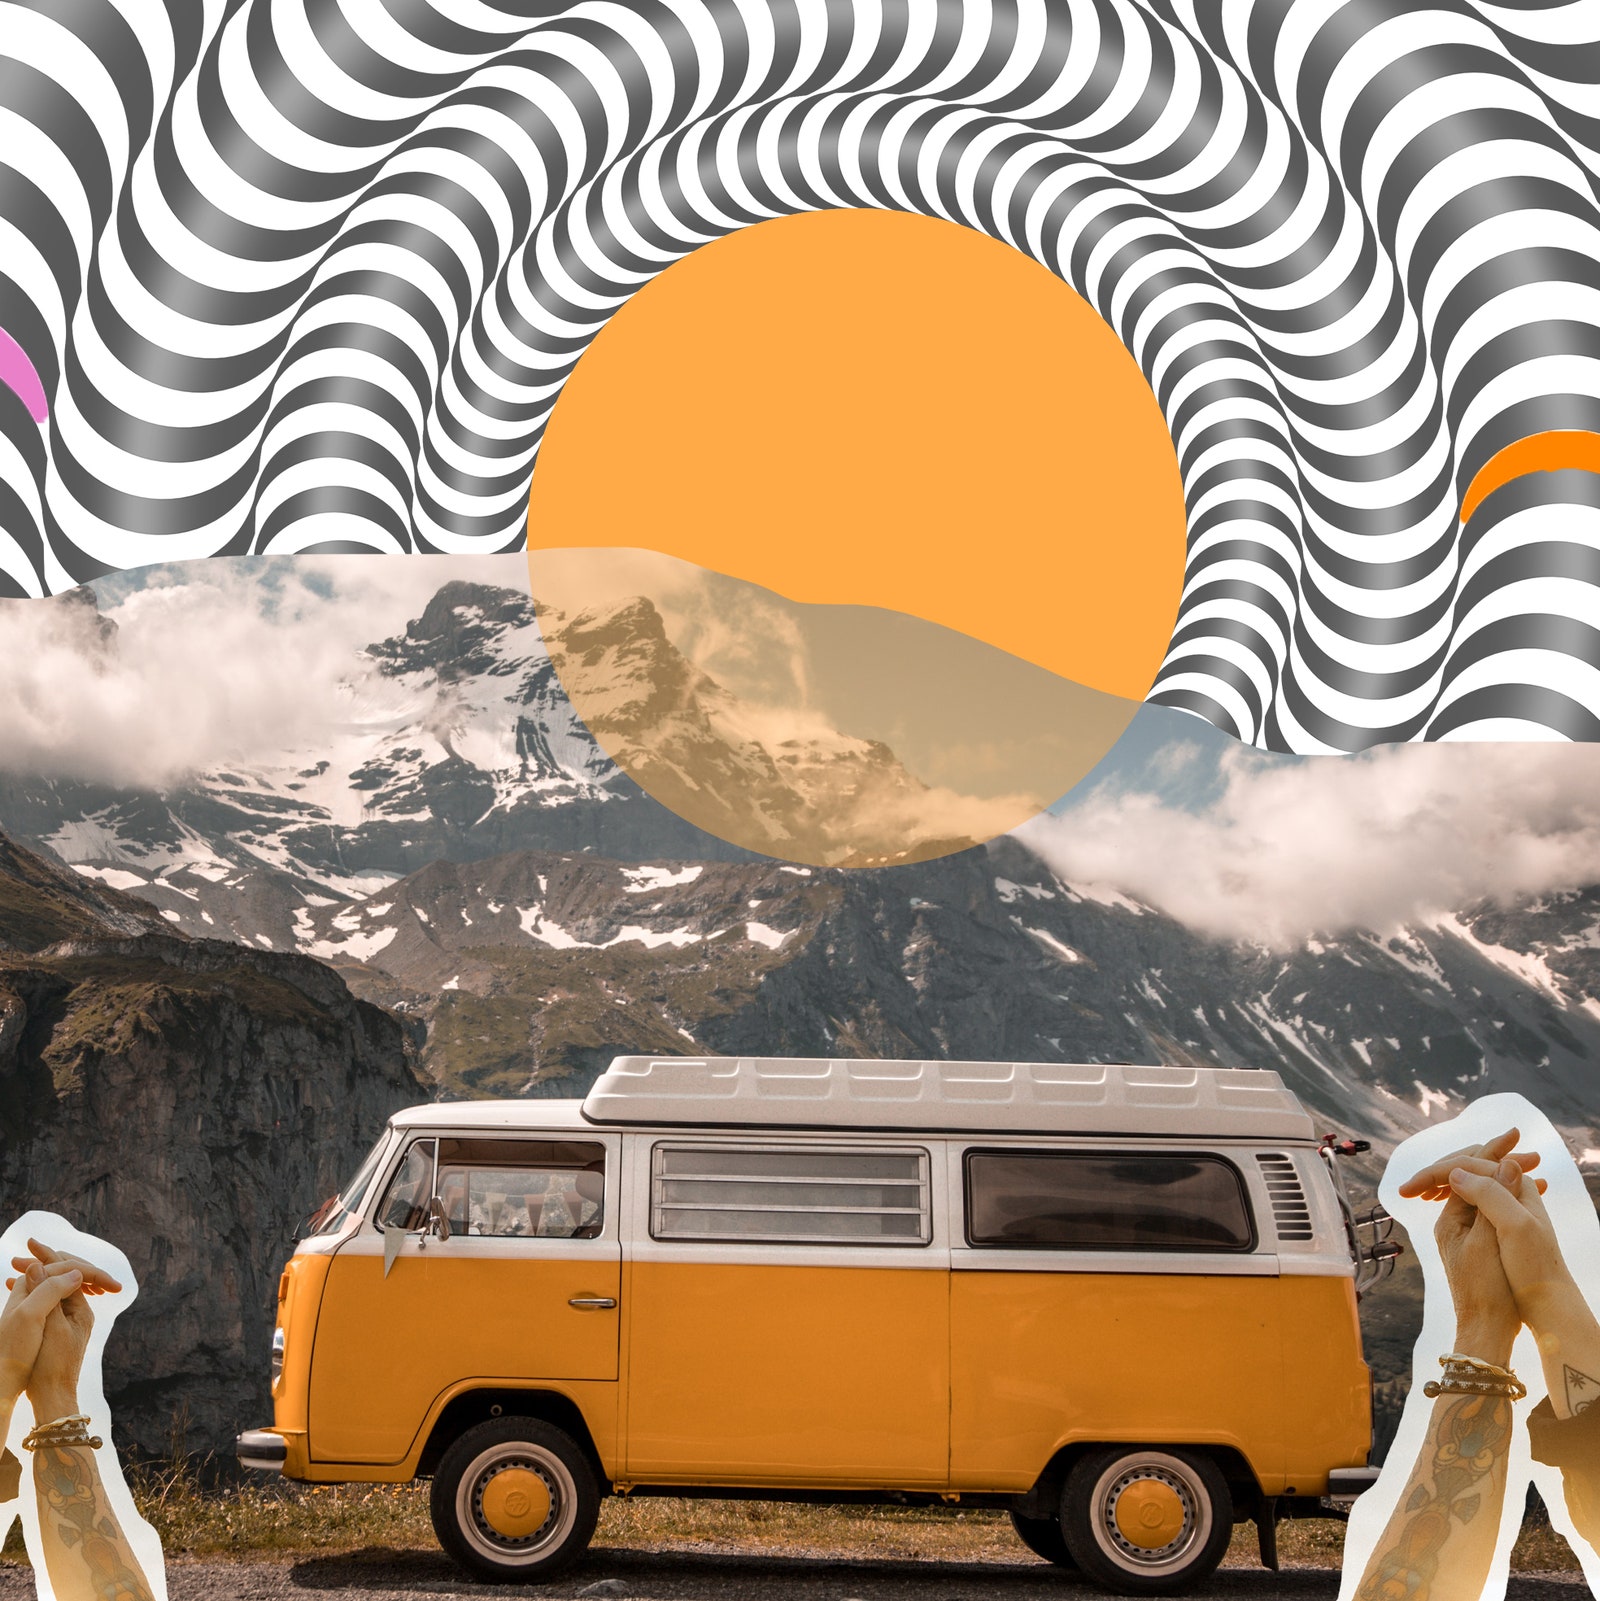 collage. van. sun. colorful. weed. cannabis. drink. pour. hands. glass. mountain